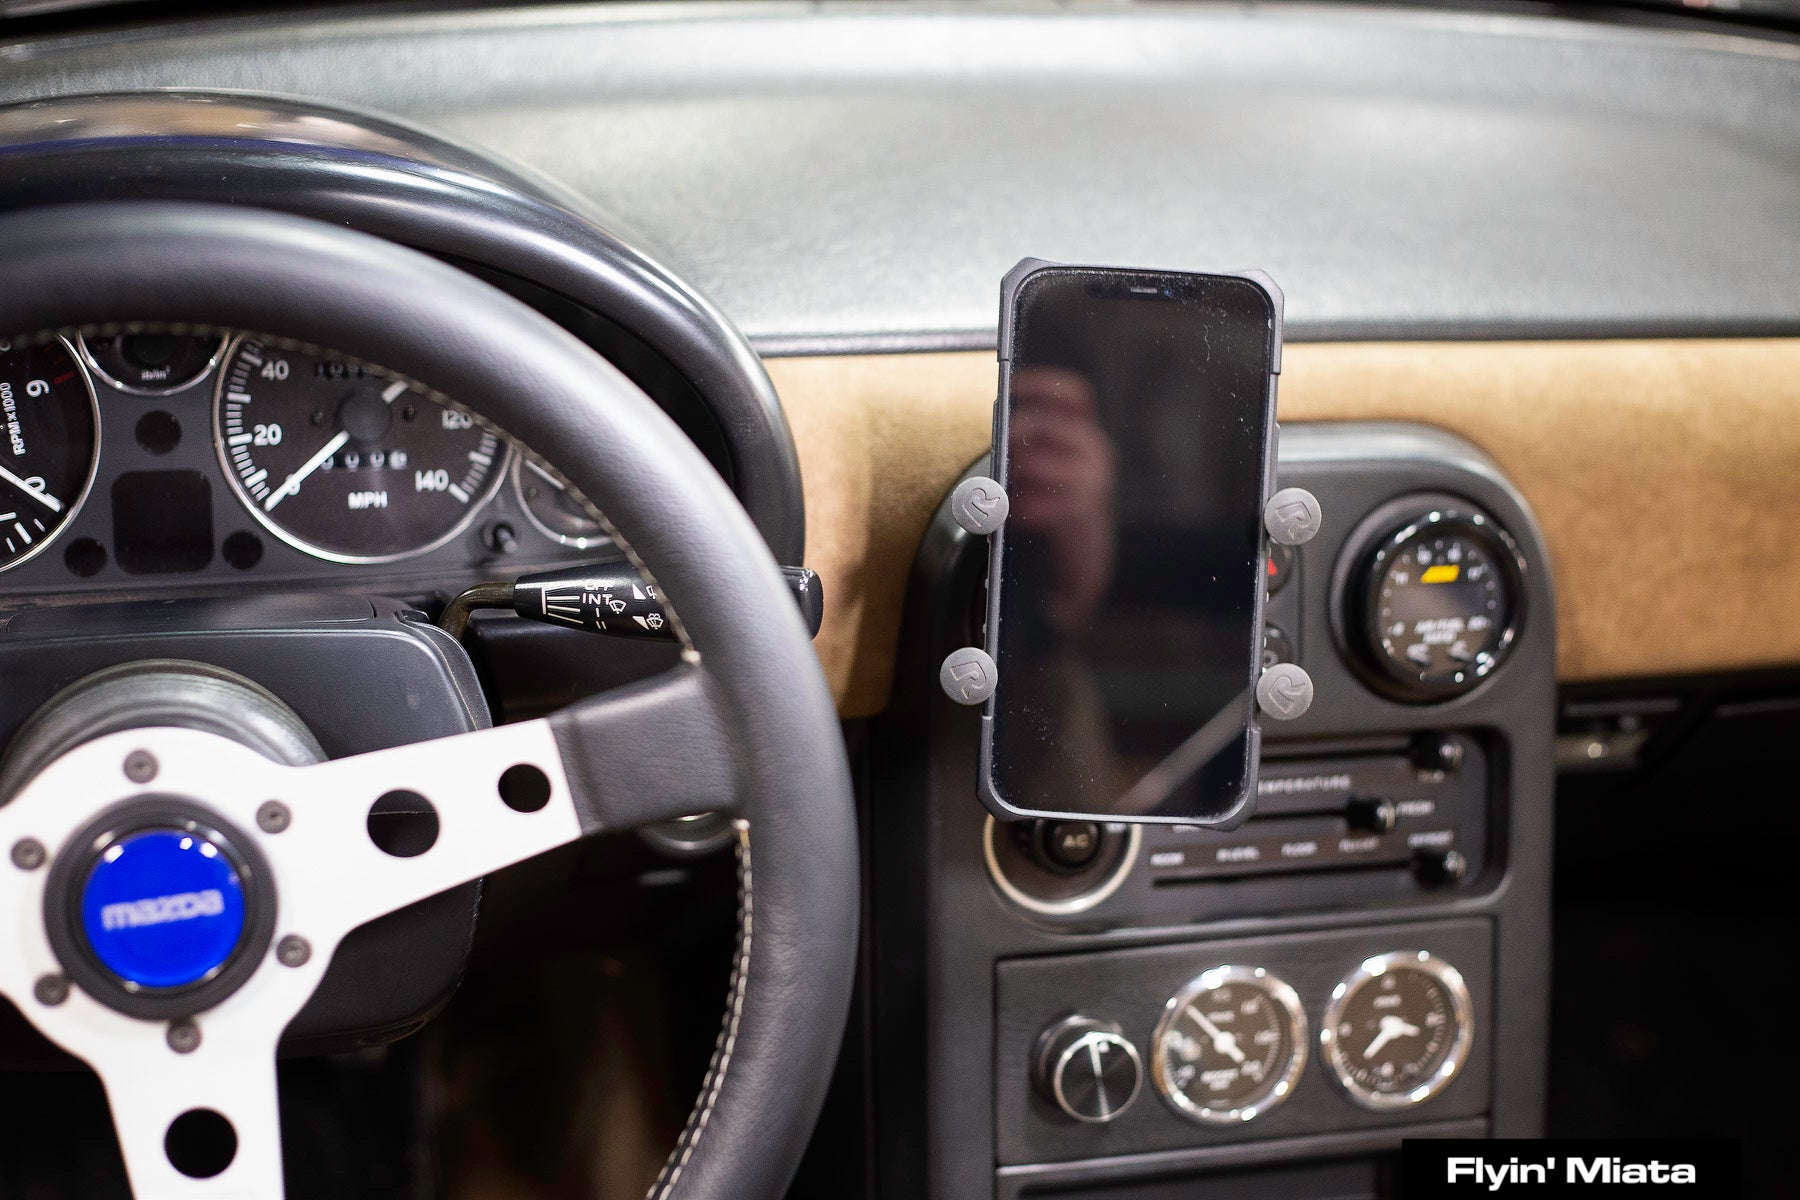 Need a clean, Miata-specific phone holder? Or a whatever holder